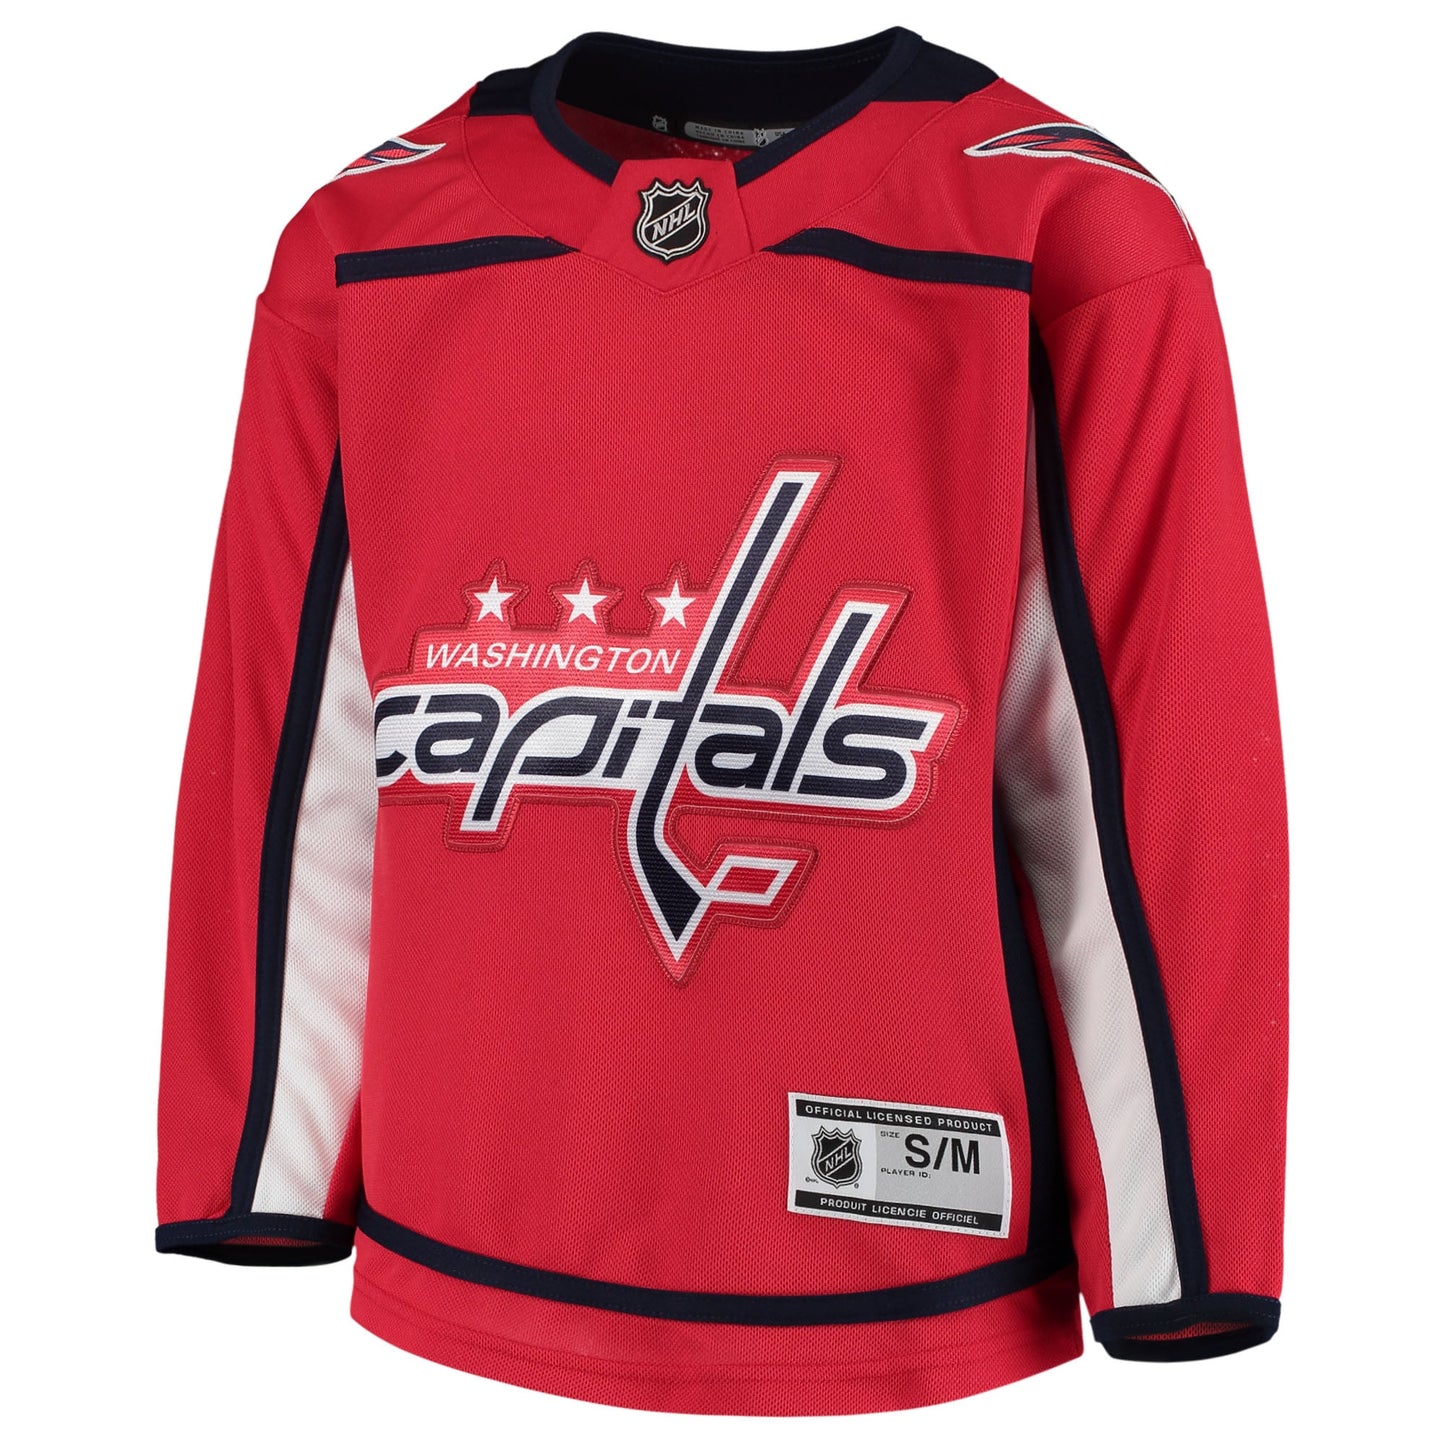 Washington Capitals Youth Home Premier Team Jersey - Red